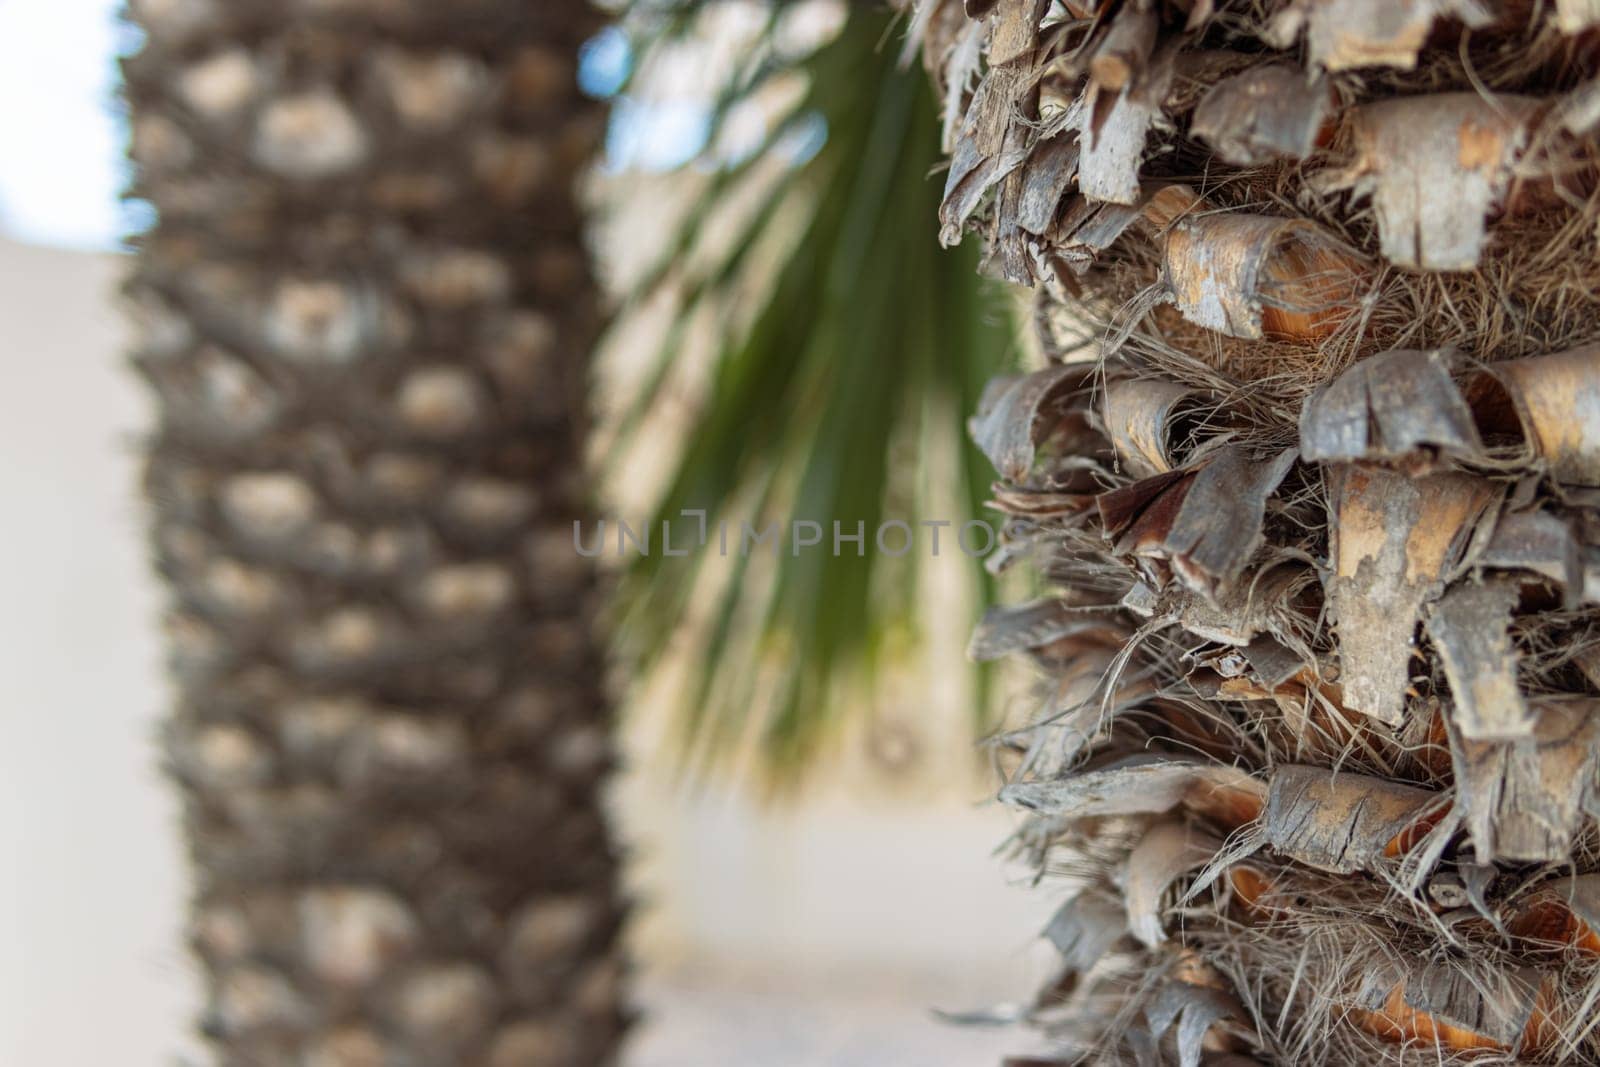 pillar of palm trees close-up, focus on the front palm tree, background blurred by PopOff